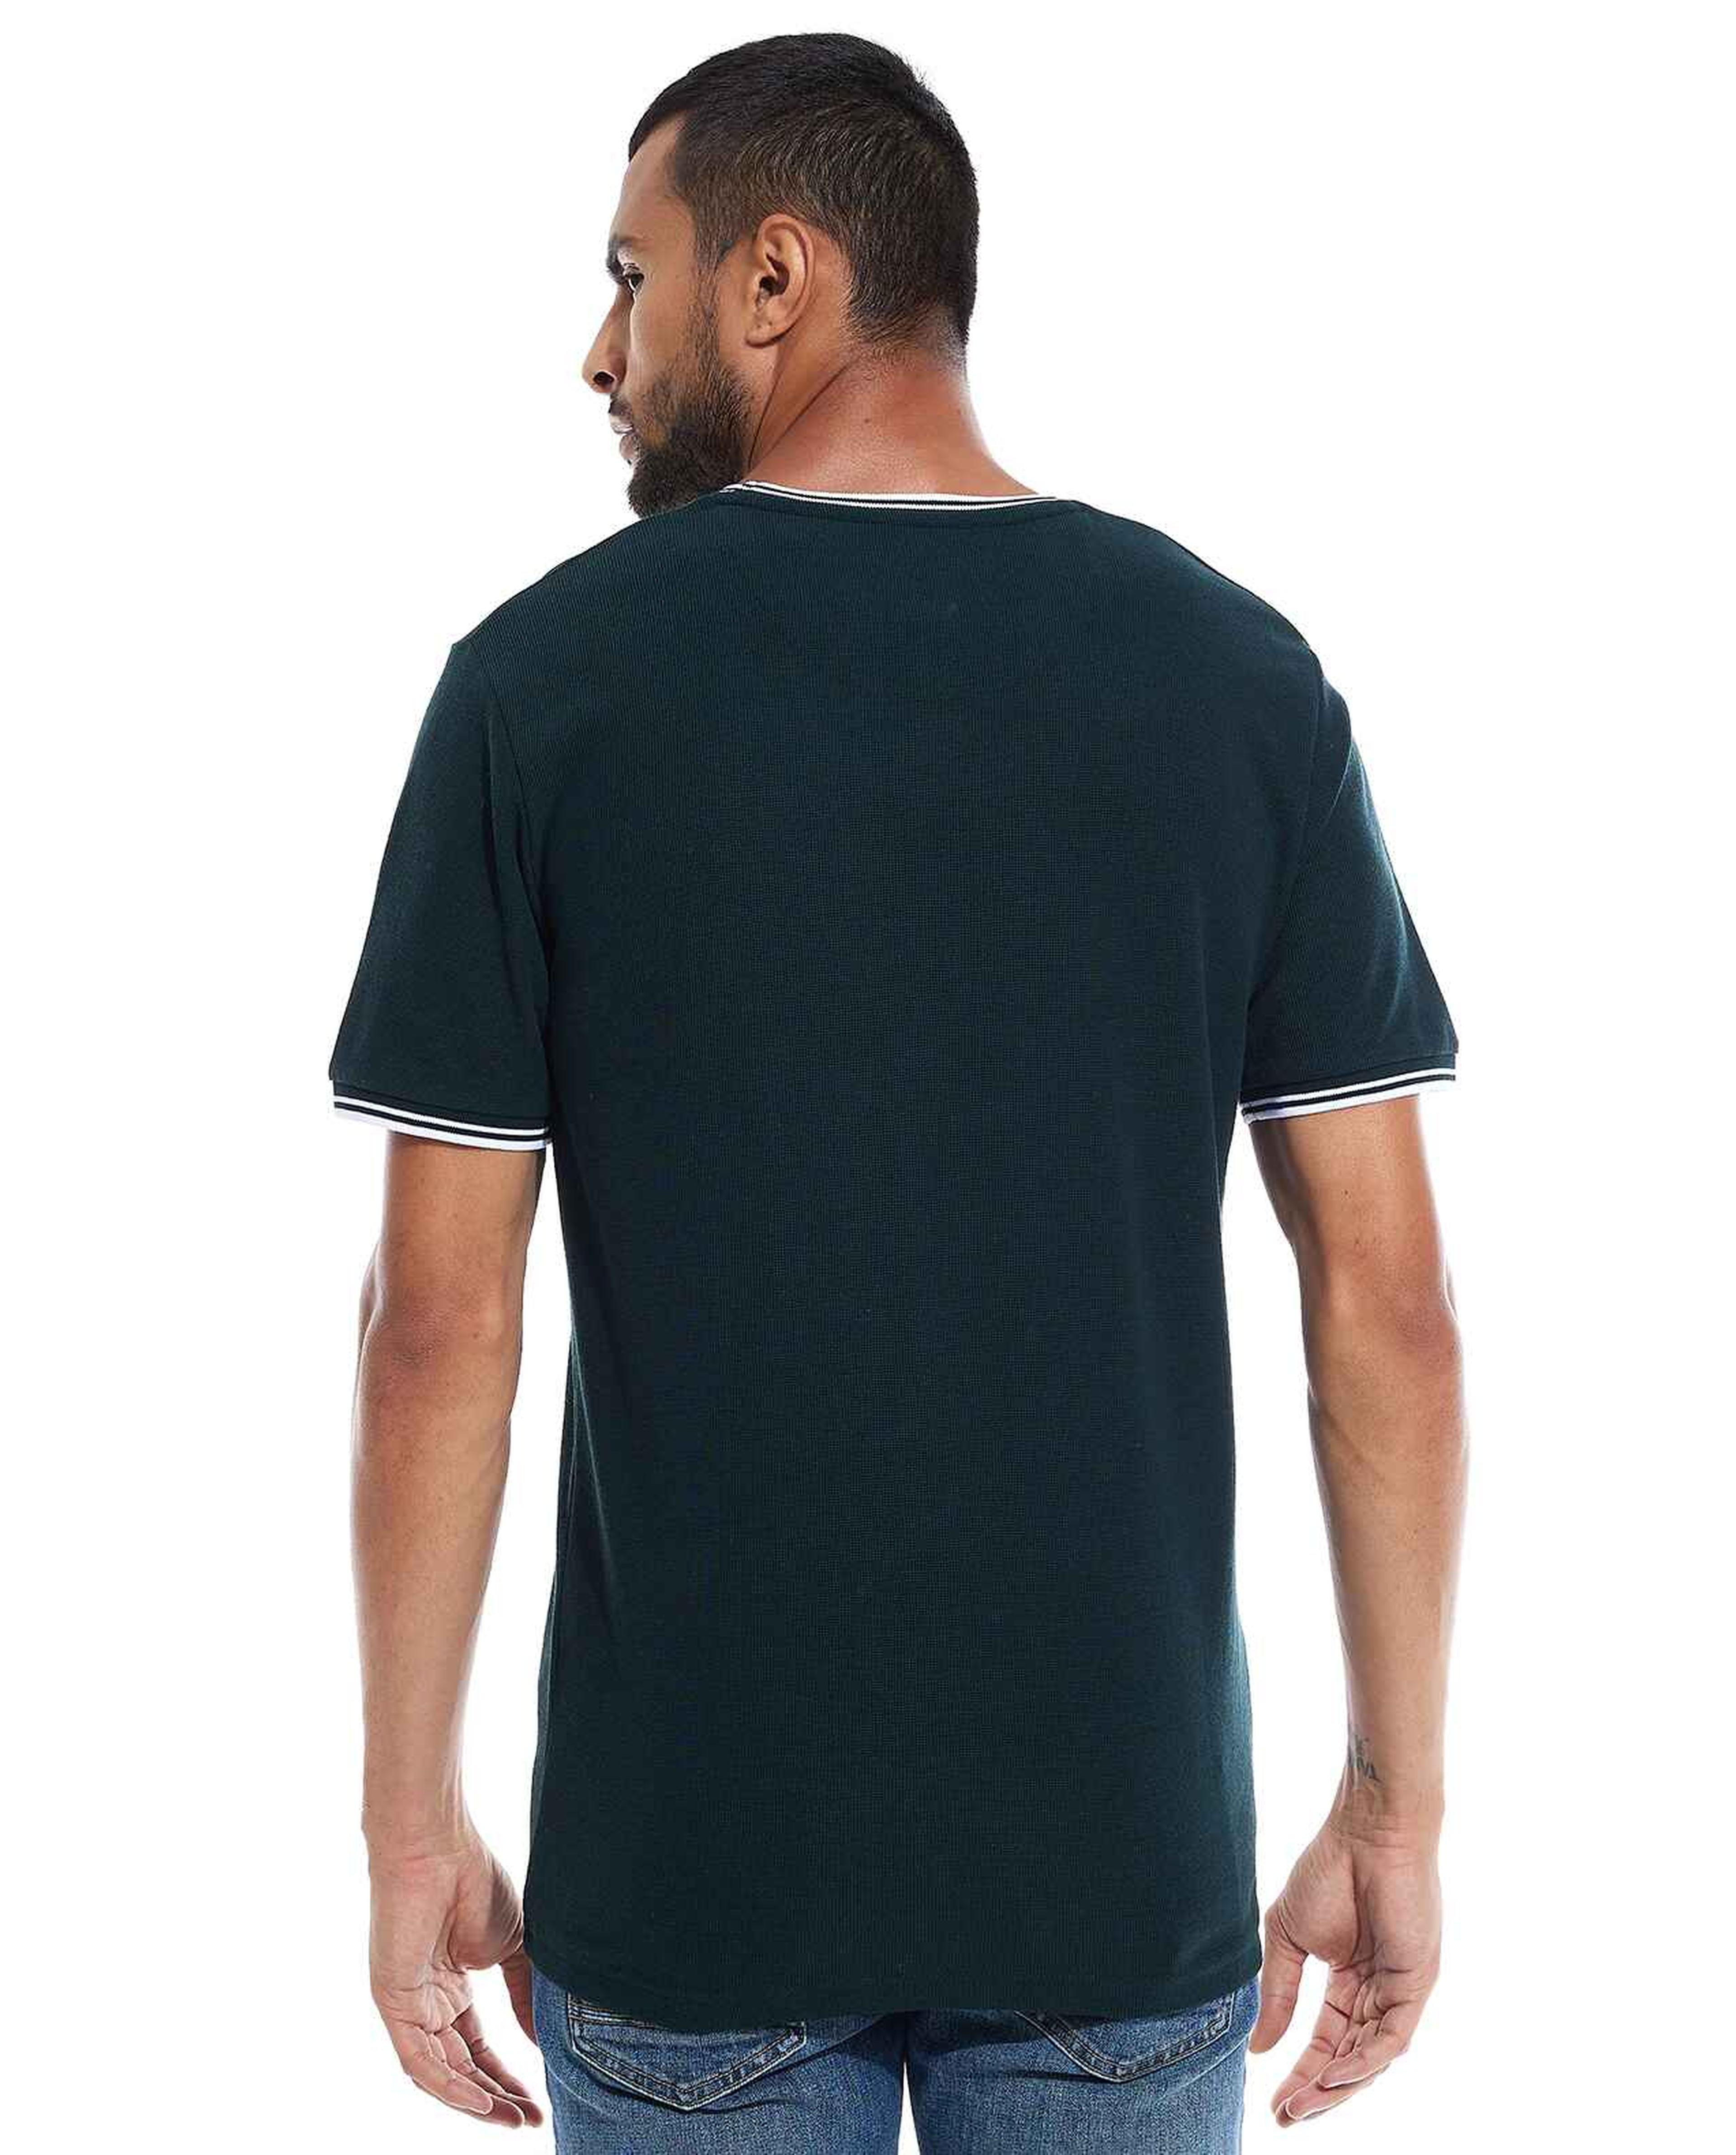 Contrast Tipping T-Shirt with Crew Neck and Short Sleeves